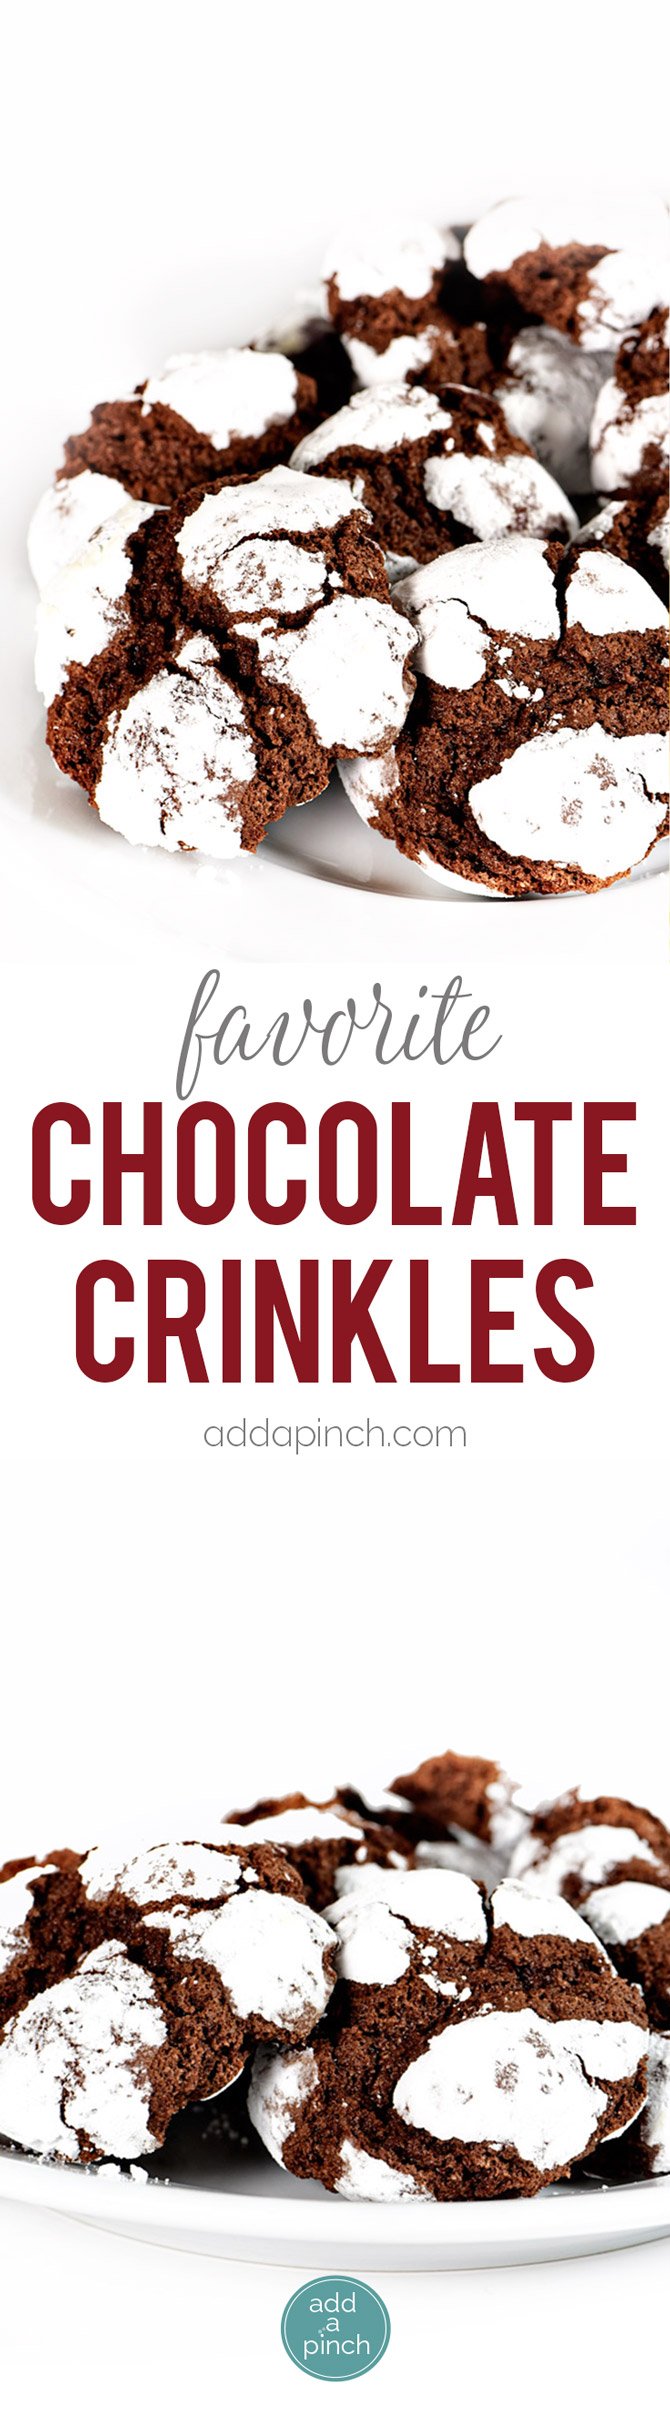 Chocolate Crinkle Cookies Recipe - Chocolate crinkle cookies coated in powdered sugar and baked into a soft, chewy, delicious chocolate cookie! What's not to love! // addapinch.com